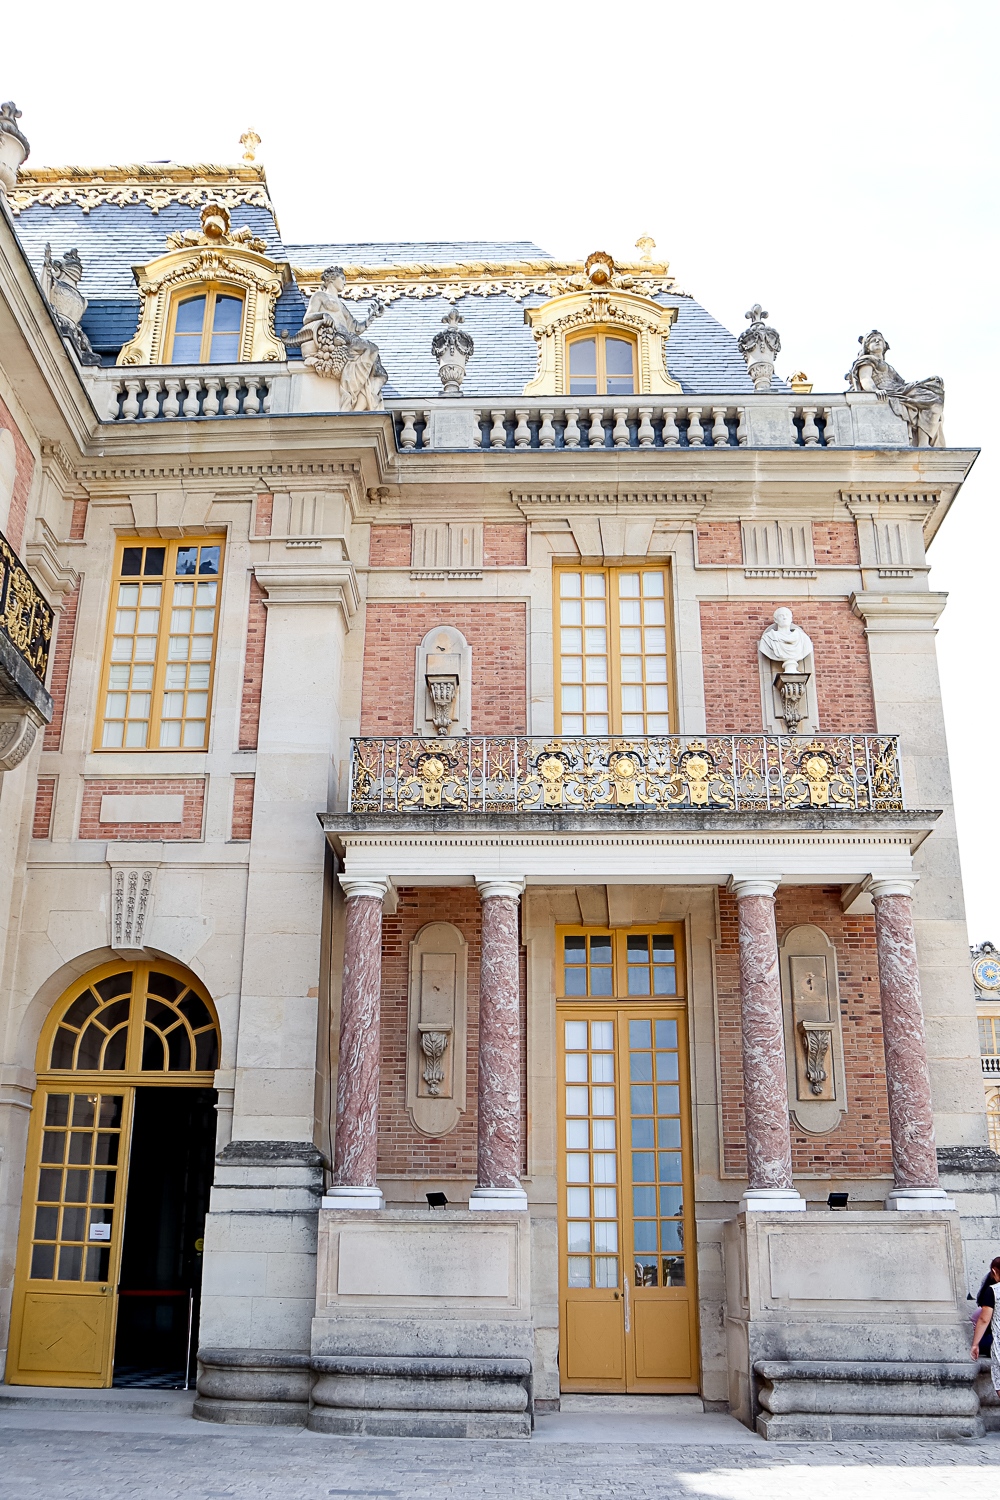 Pacific Globetrotters, budget family travel blog, shares 5 day itinerary in Paris with kids. Palace of Versailles